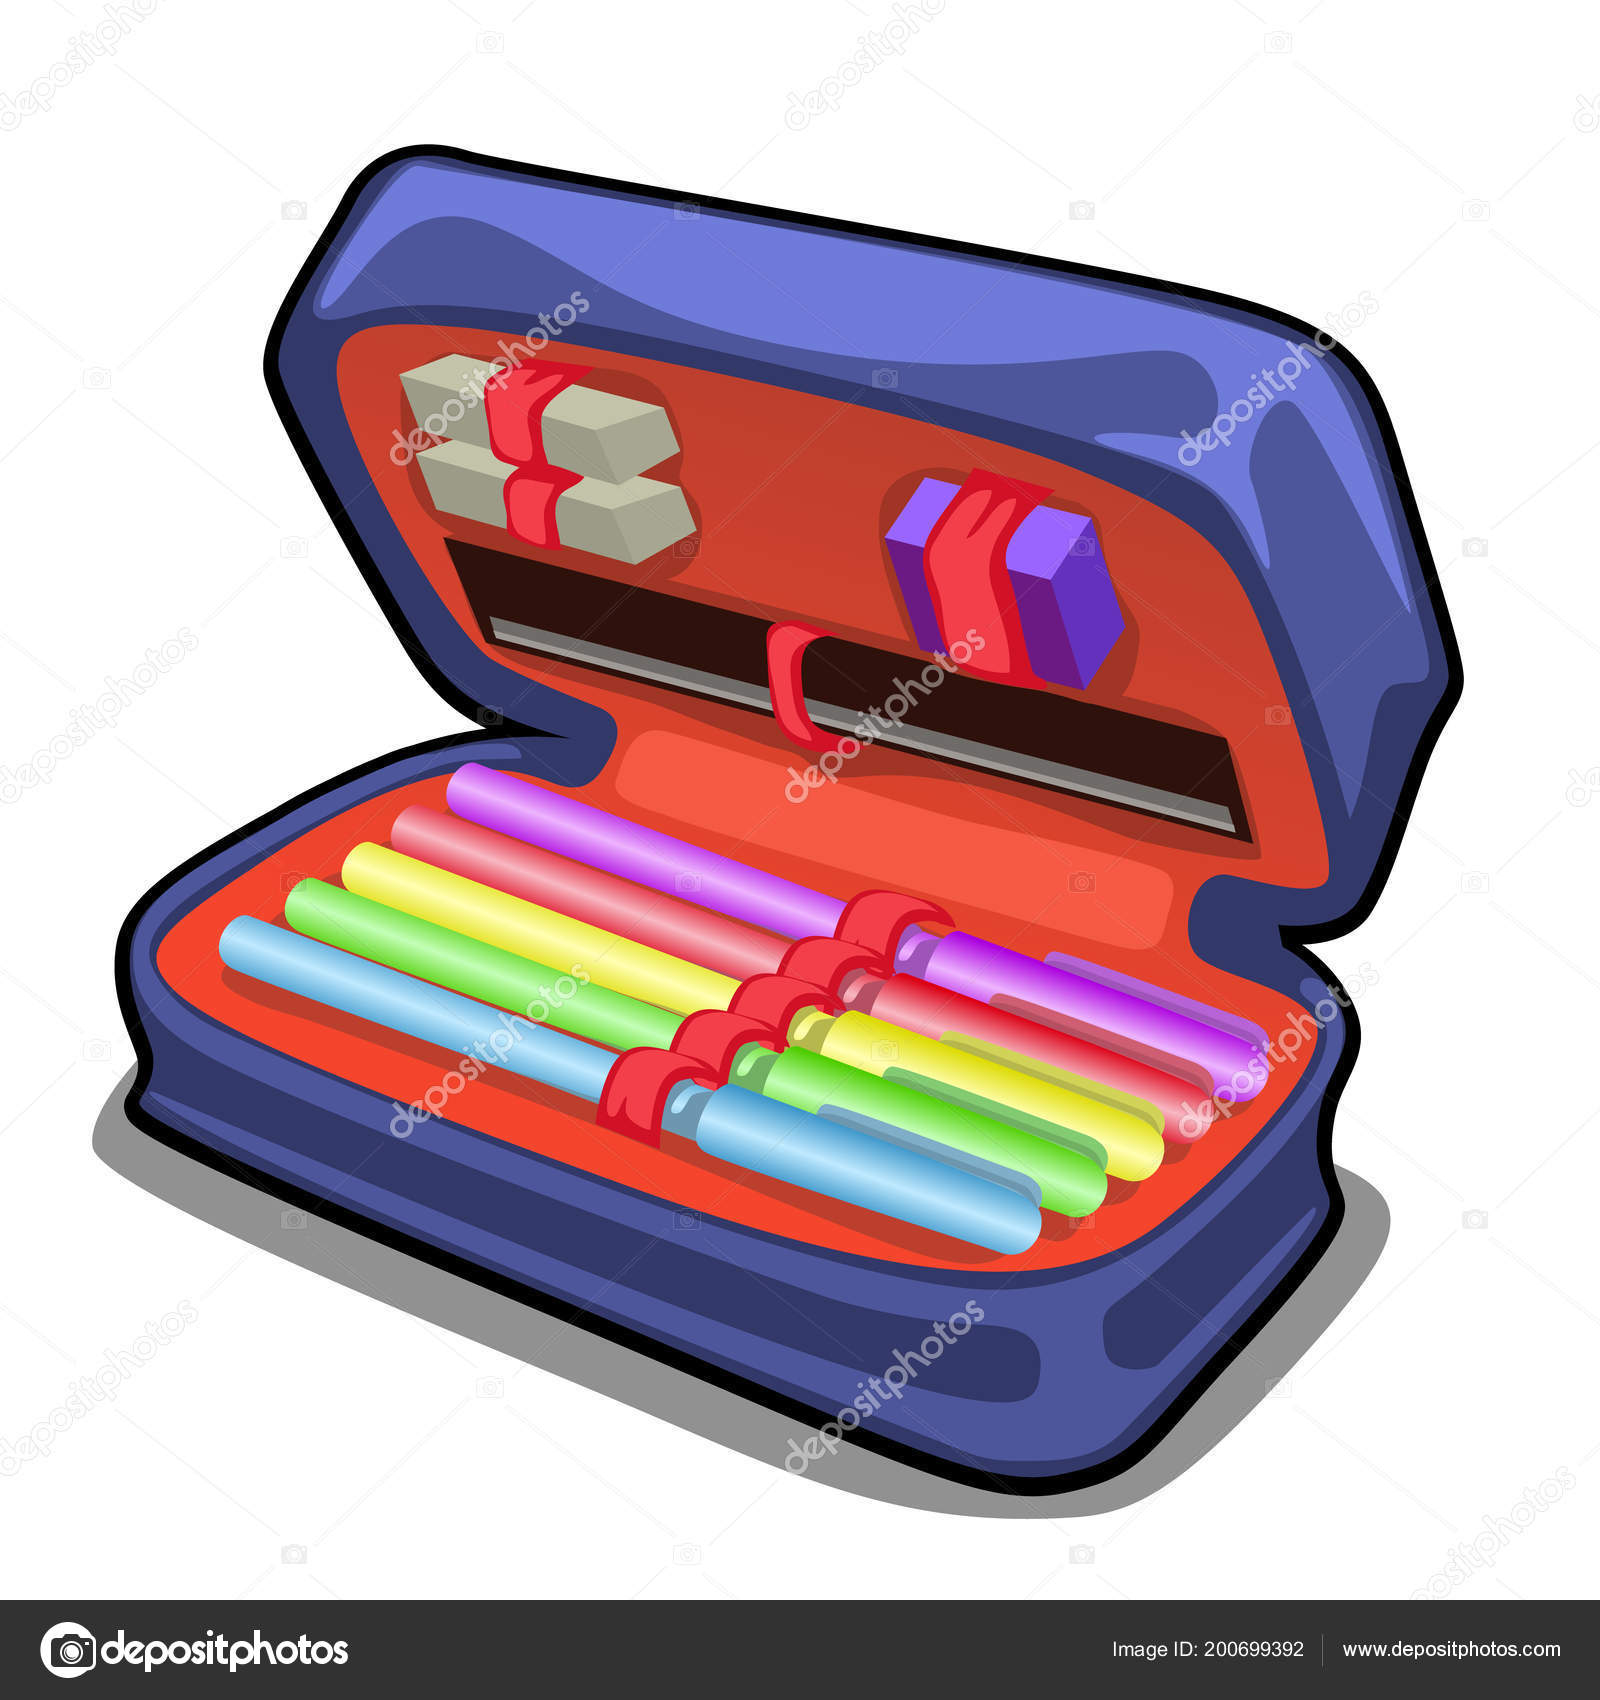 School Pencil Case With Stationery Set Isolated On White Background Vector Cartoon Close Up Illustration Vector Image By C Anton Lunkov Vector Stock